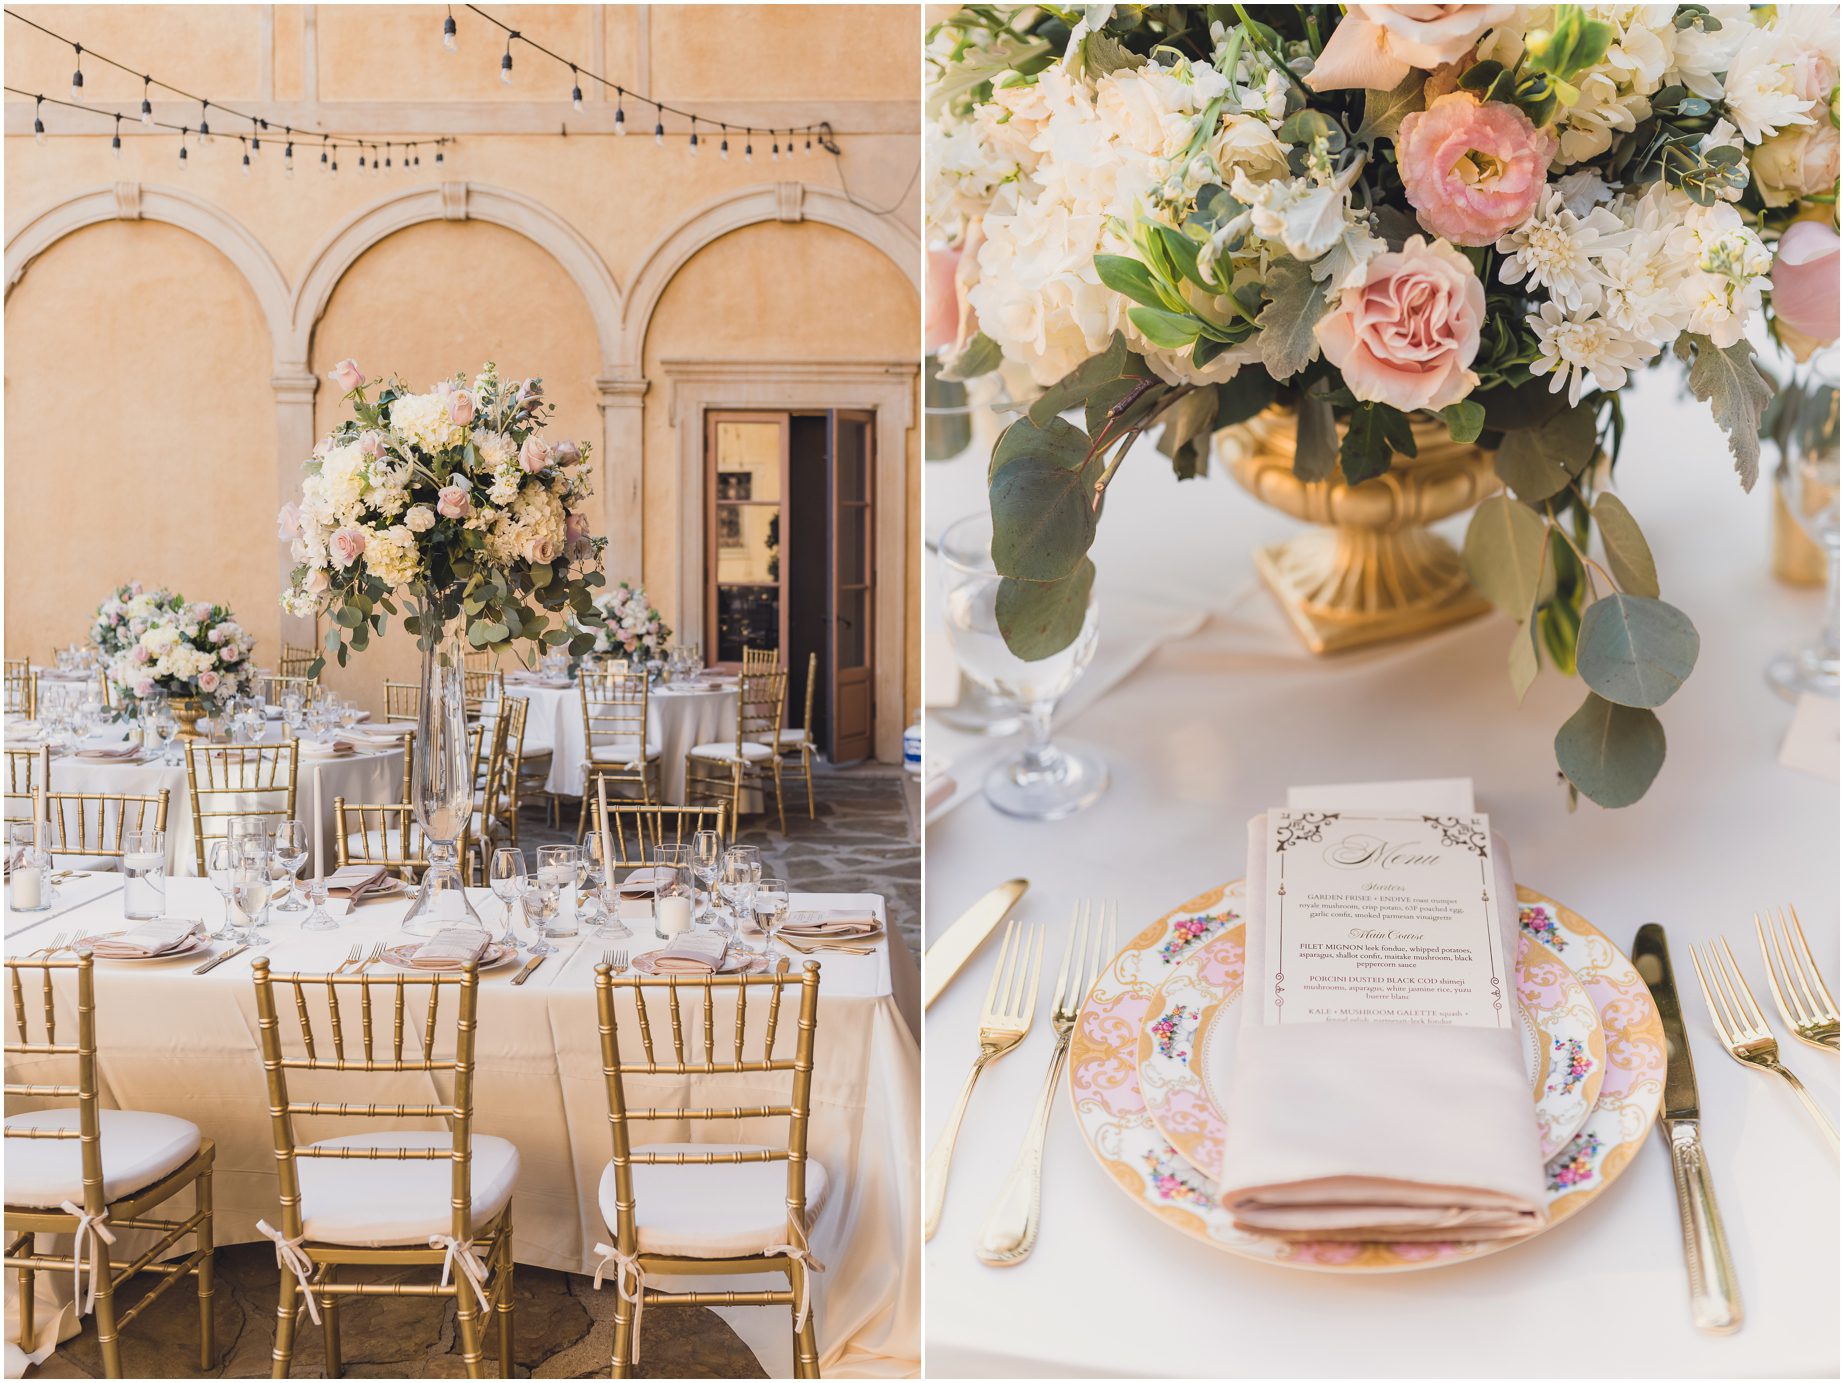 beautiful reception at Villa del sol d'Oro, featuring white and pink flowers, golden chairs, classic archways, and whimsical place settings